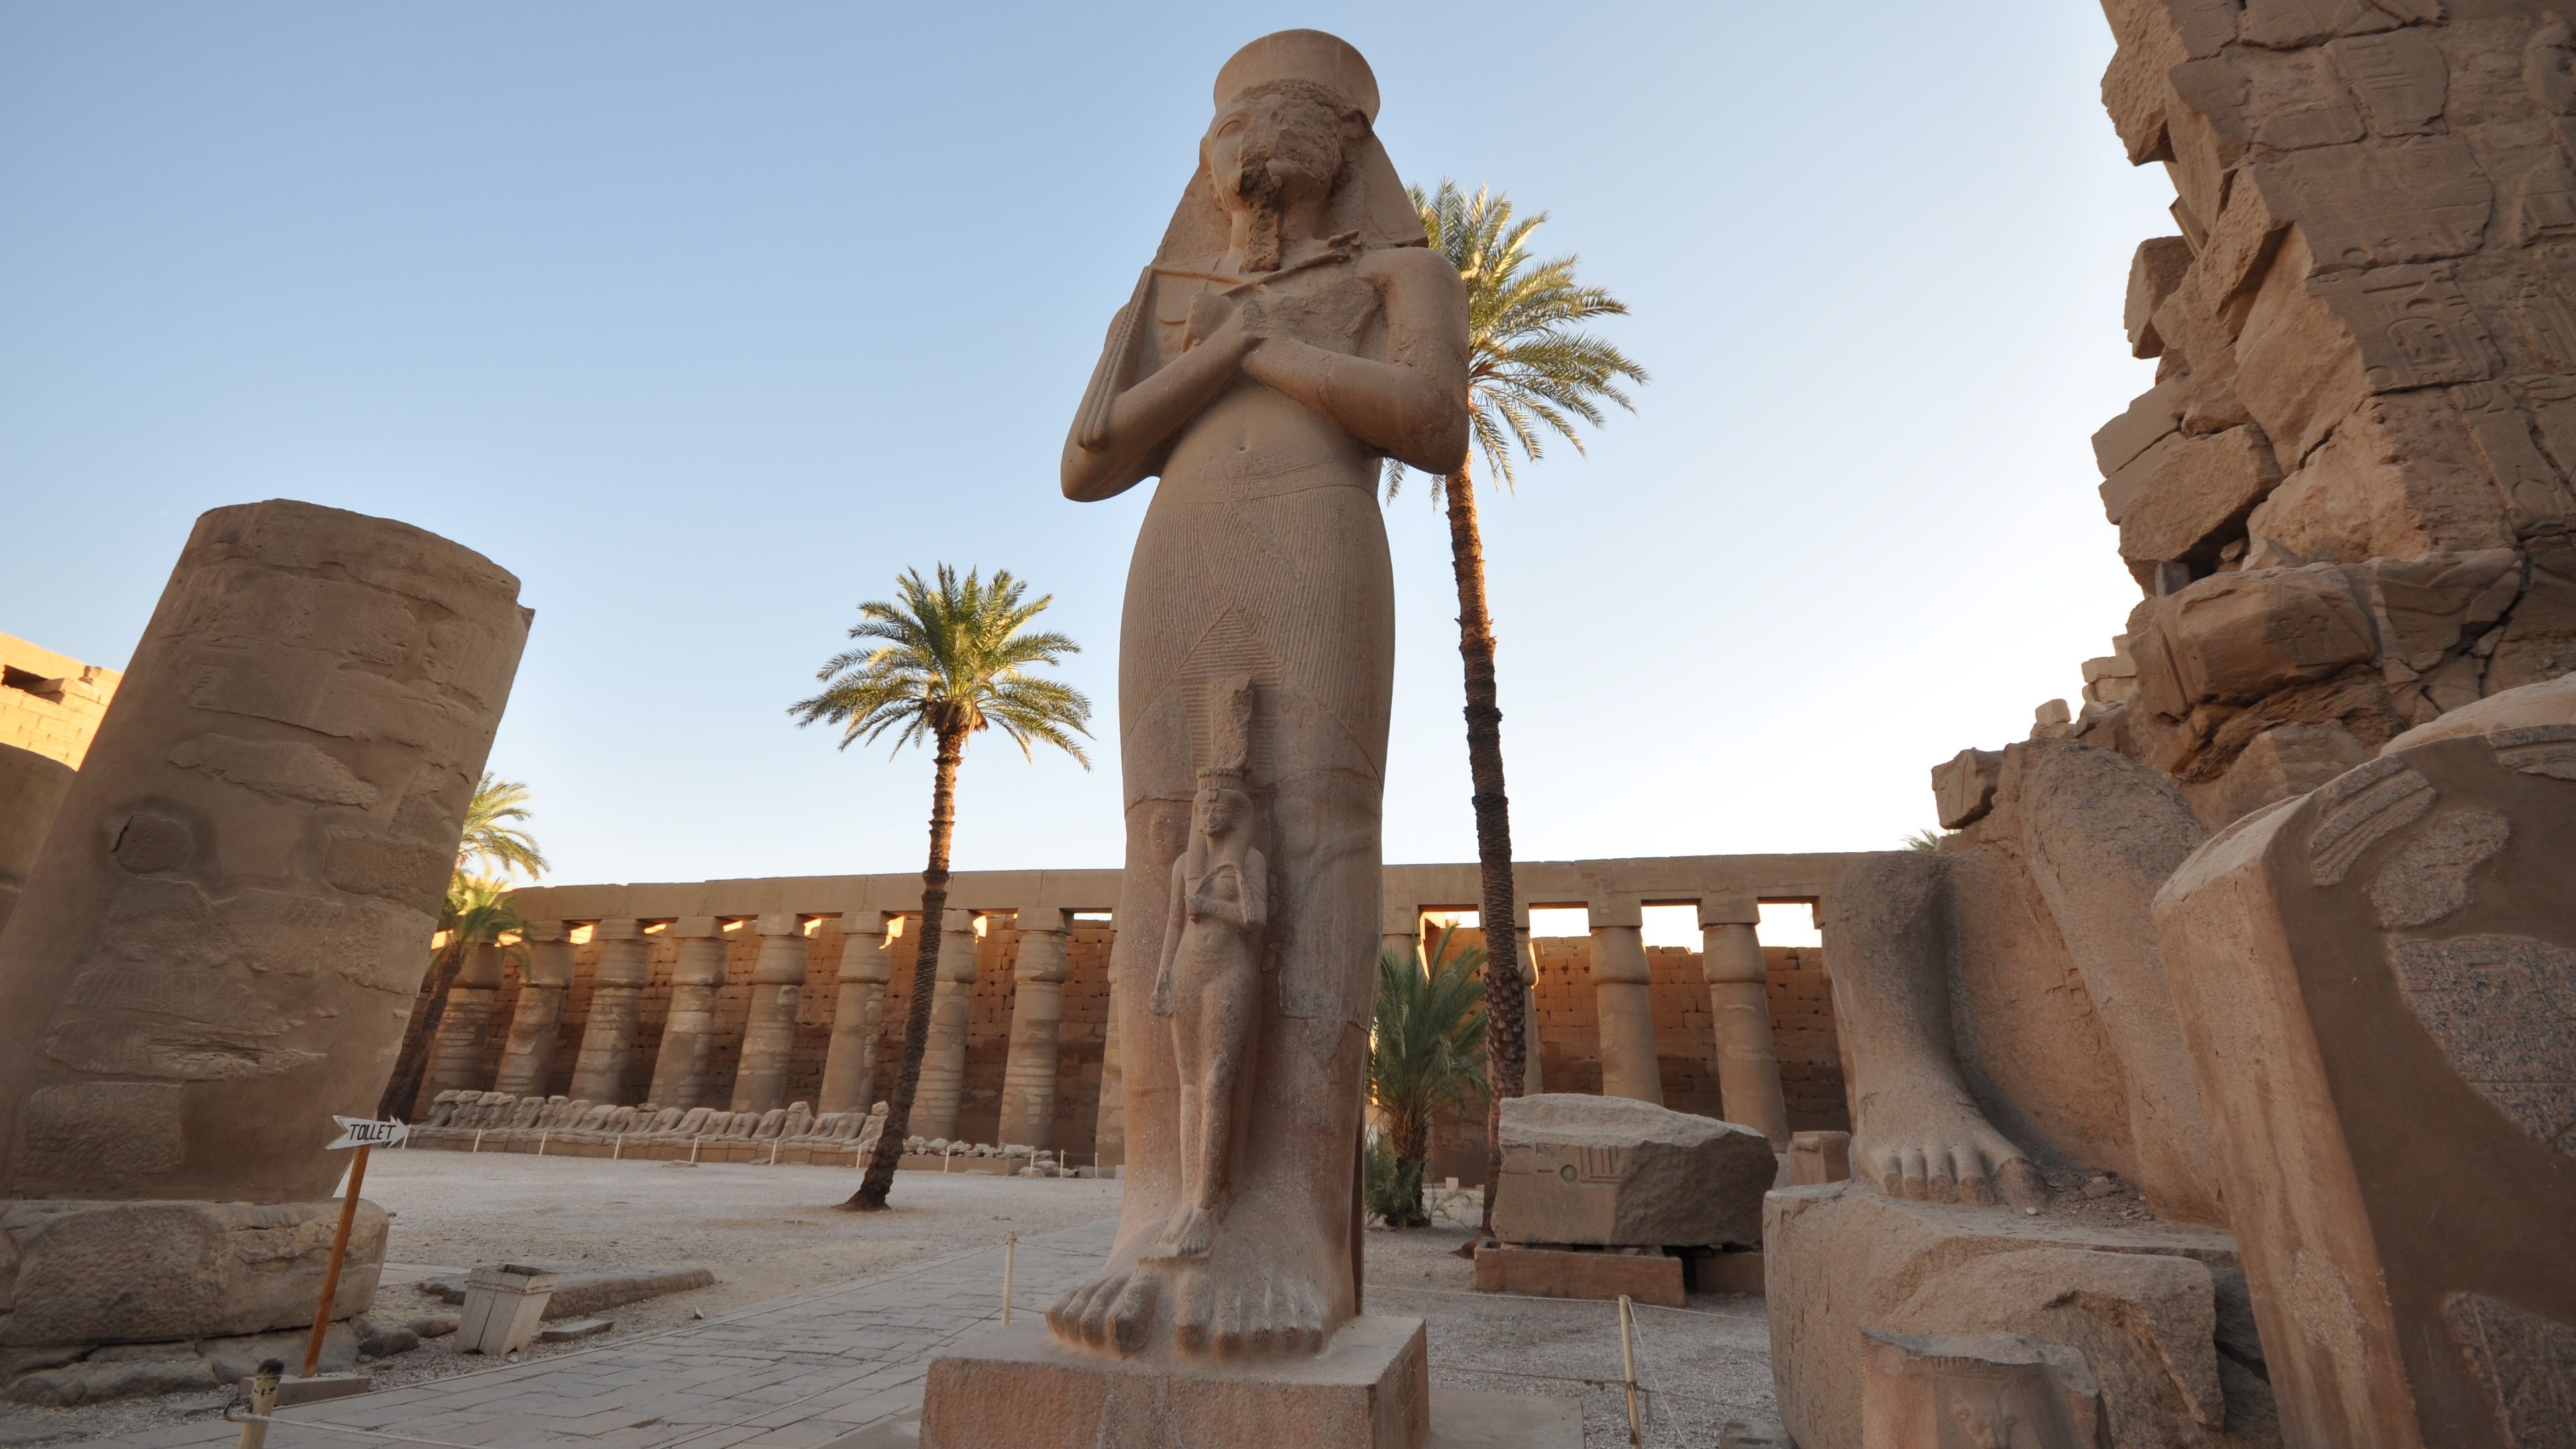 3840x2160 Karnak Temple Complex Wallpapers in HD, 4K and wide sizes